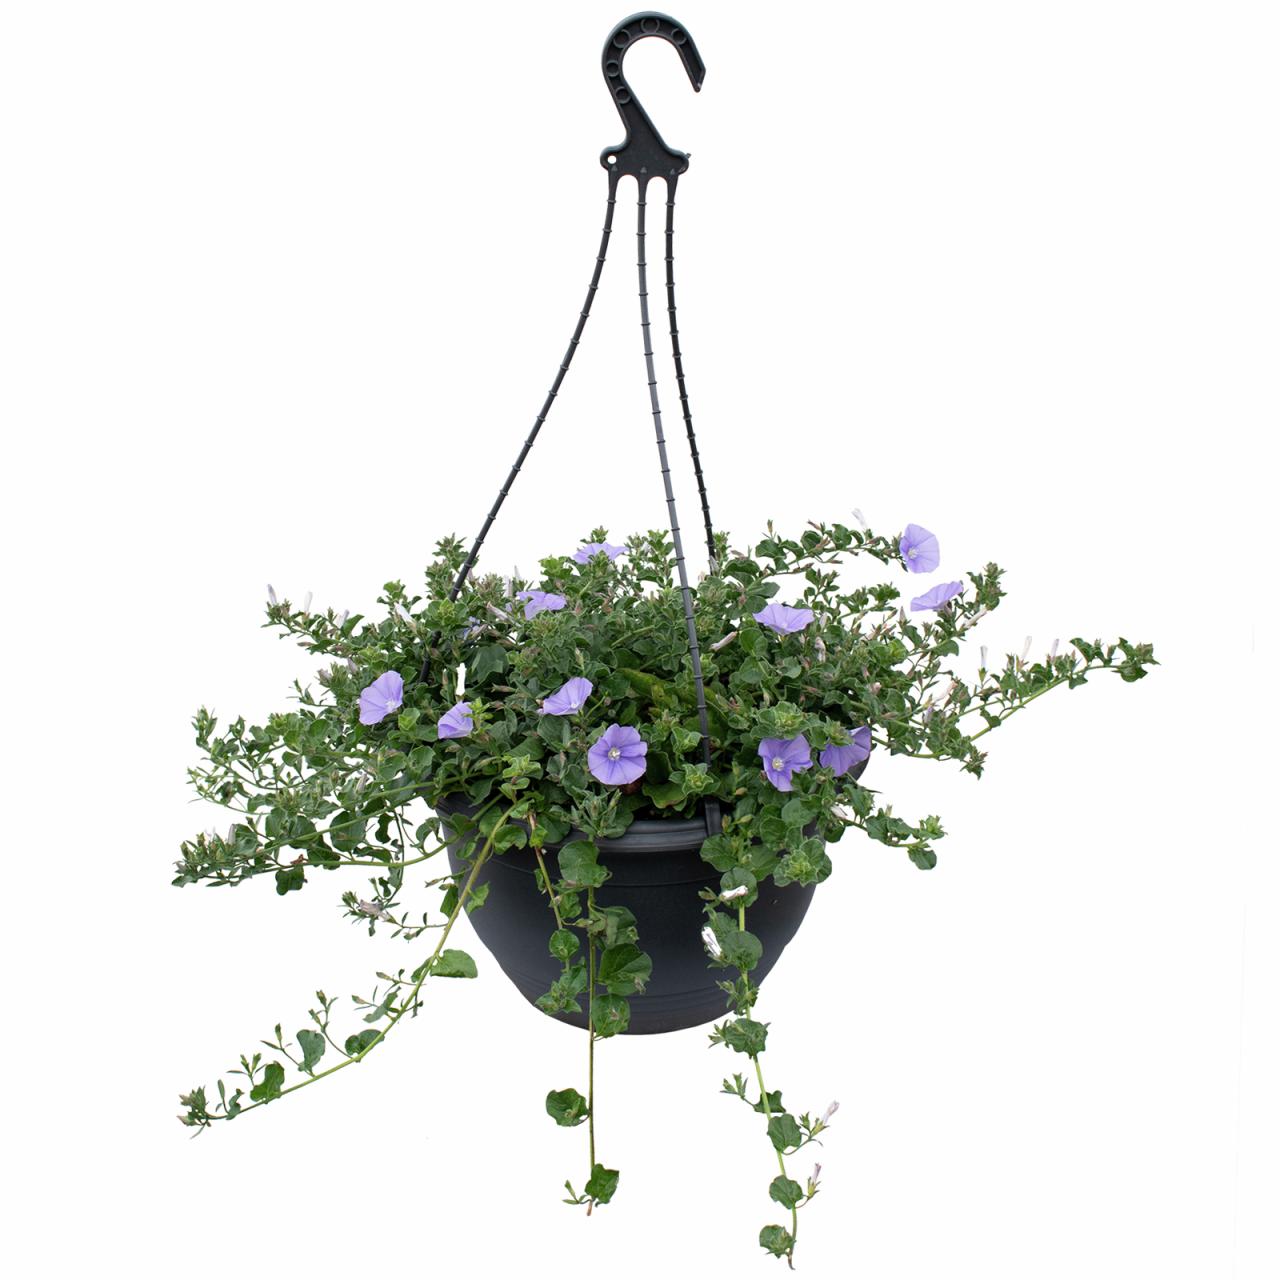 Hanging Plants Indoor | Bunnings Baskets for Plants: A Guide to Choosing, Planting, and Using